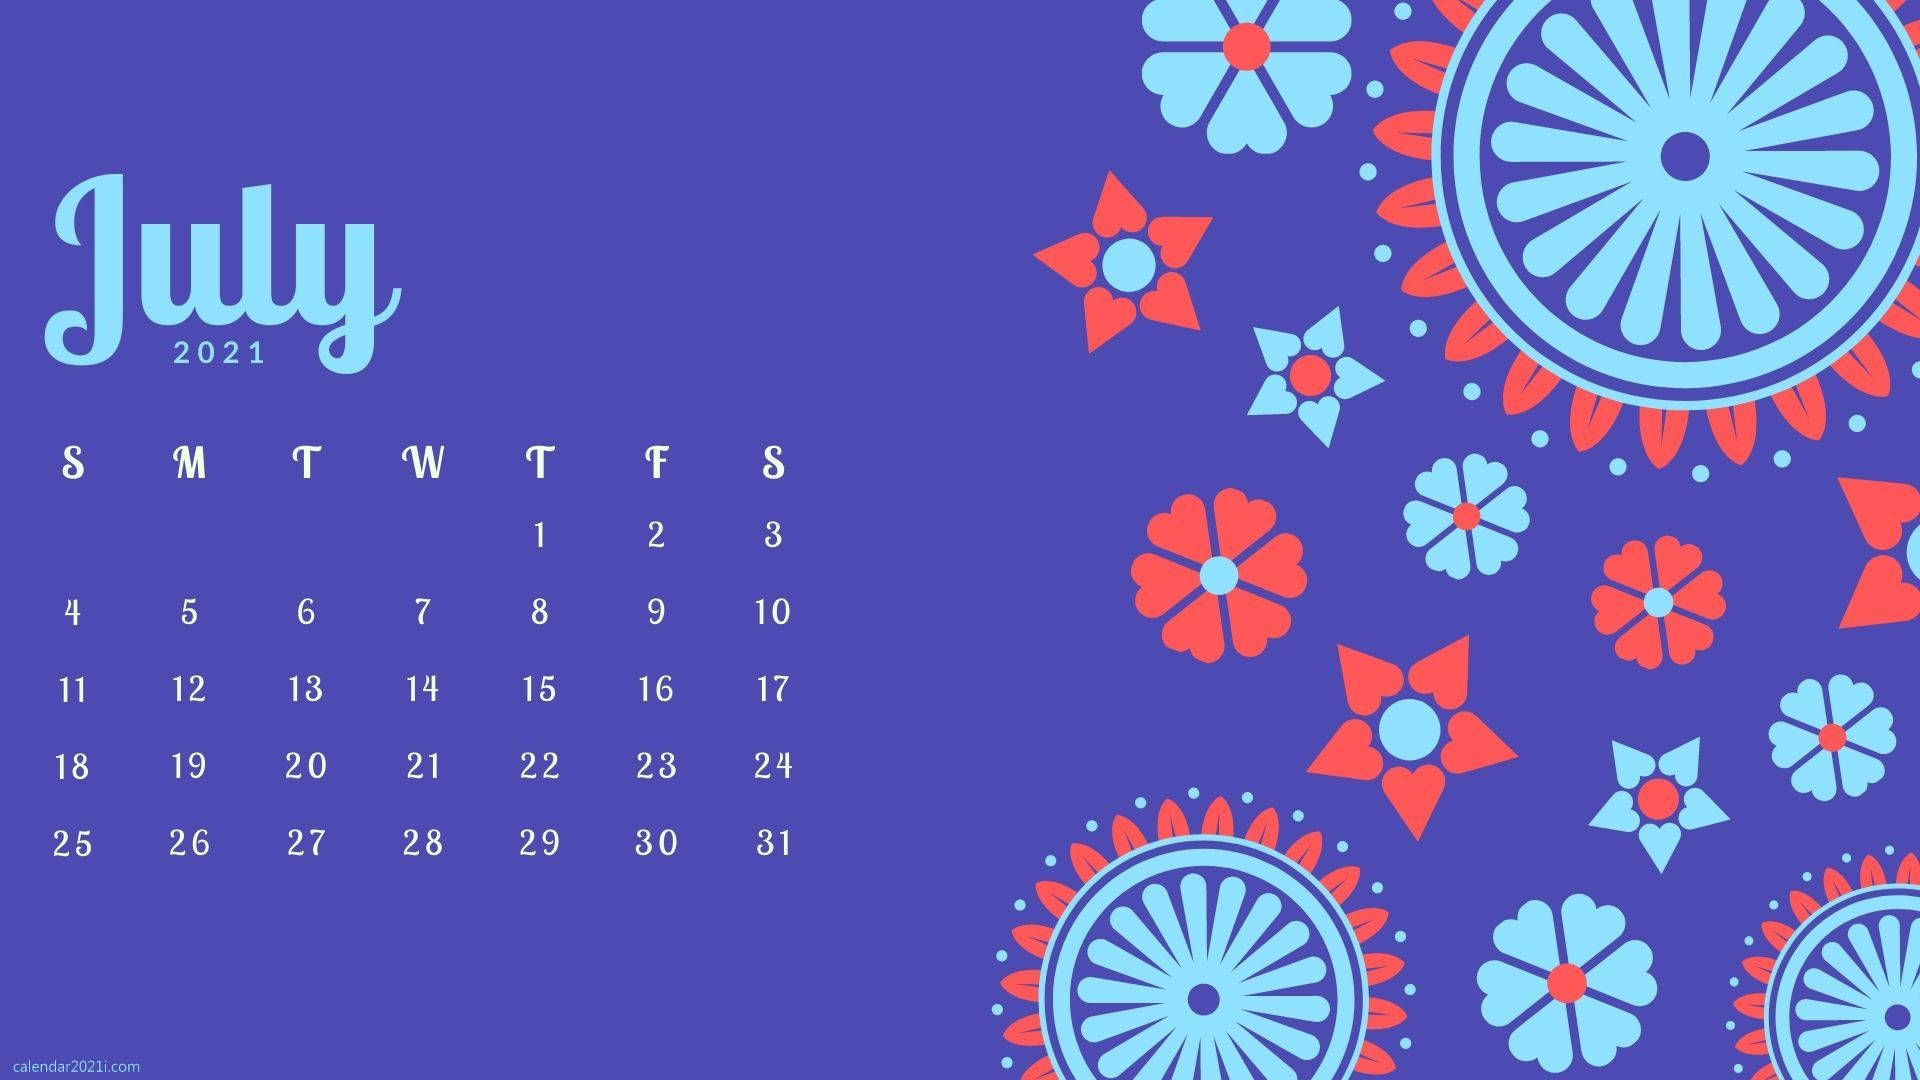 Start The Month Of July With A Colorful Calendar Background